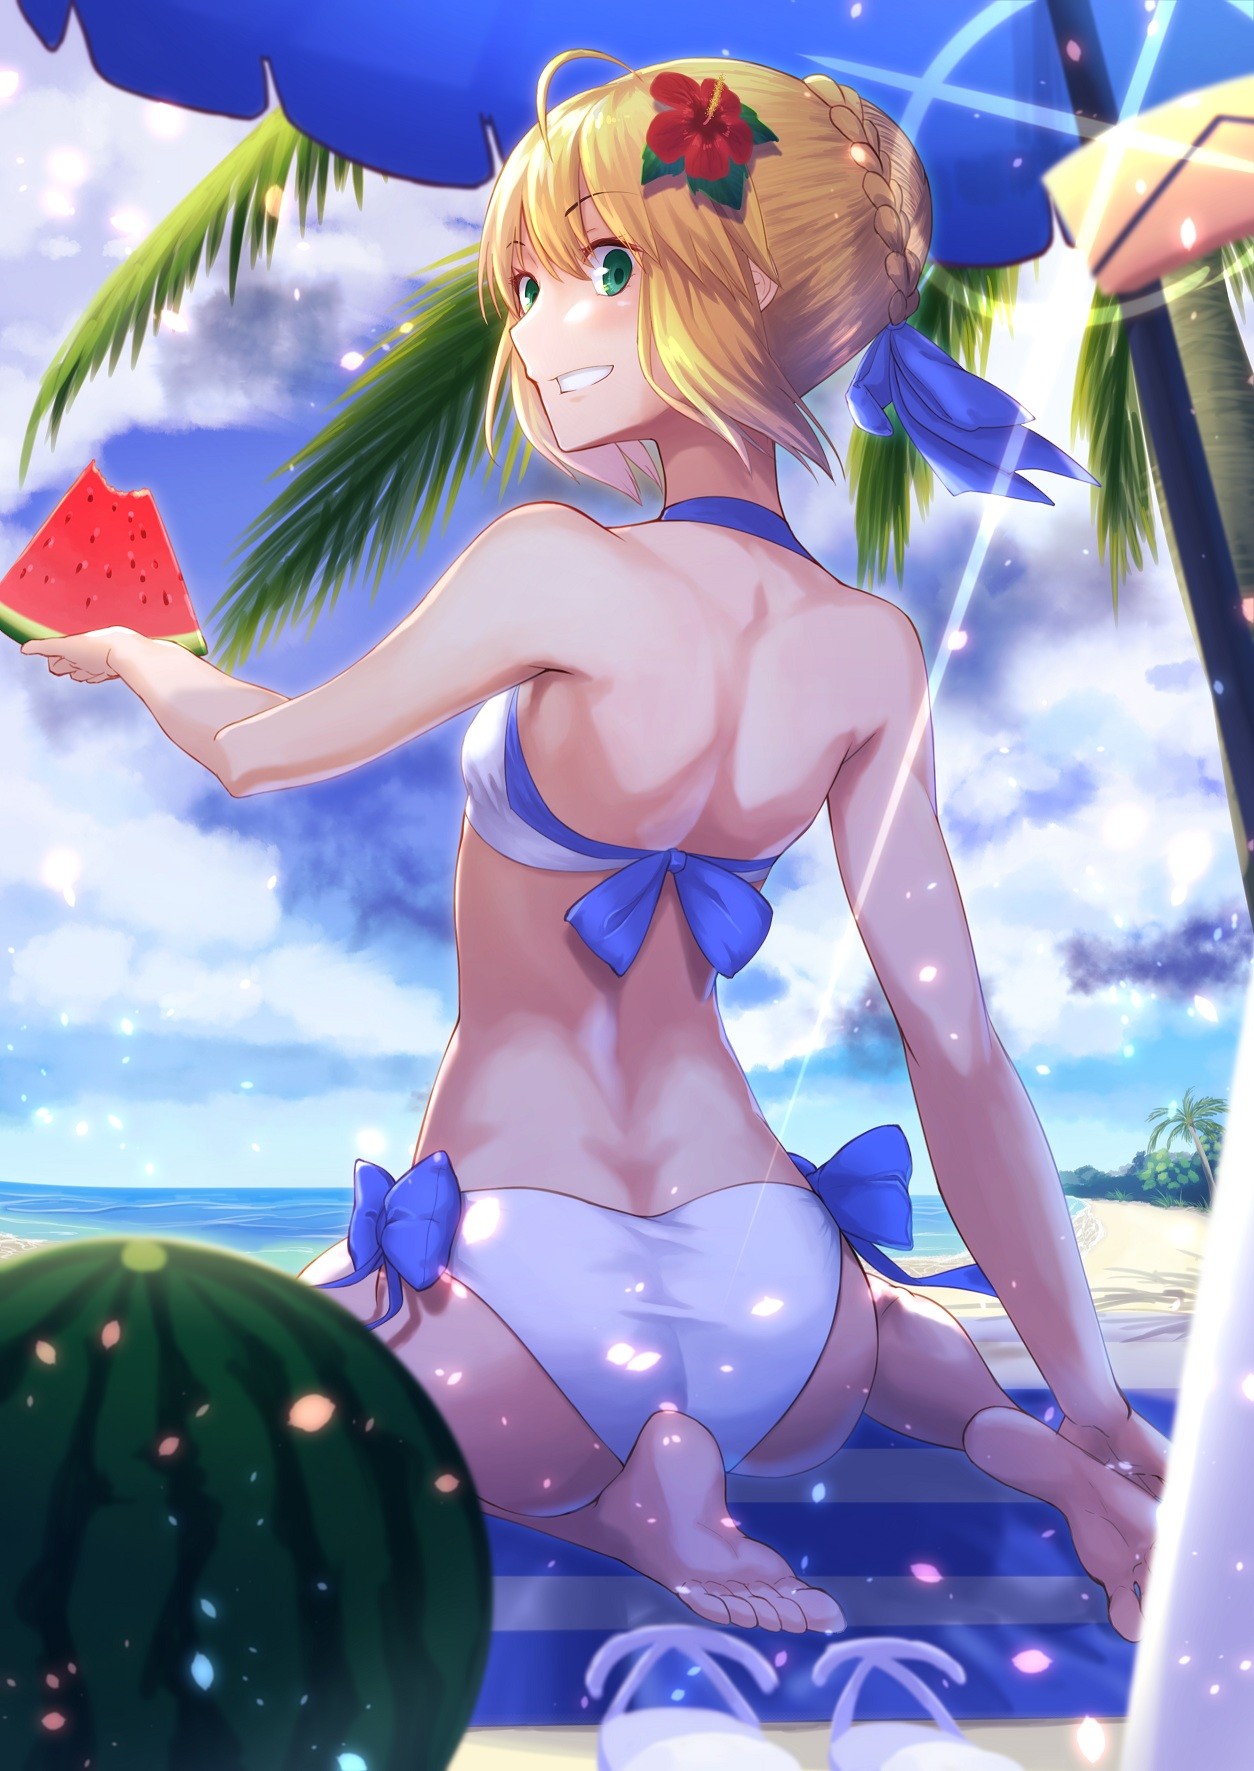 Anime 1254x1771 anime anime girls Fate/Extra Fate/Grand Order Fate/Stay Night Saber ass bikini feet short hair blonde green eyes beach sea water watermelons palm trees hibiscus flower in hair looking back